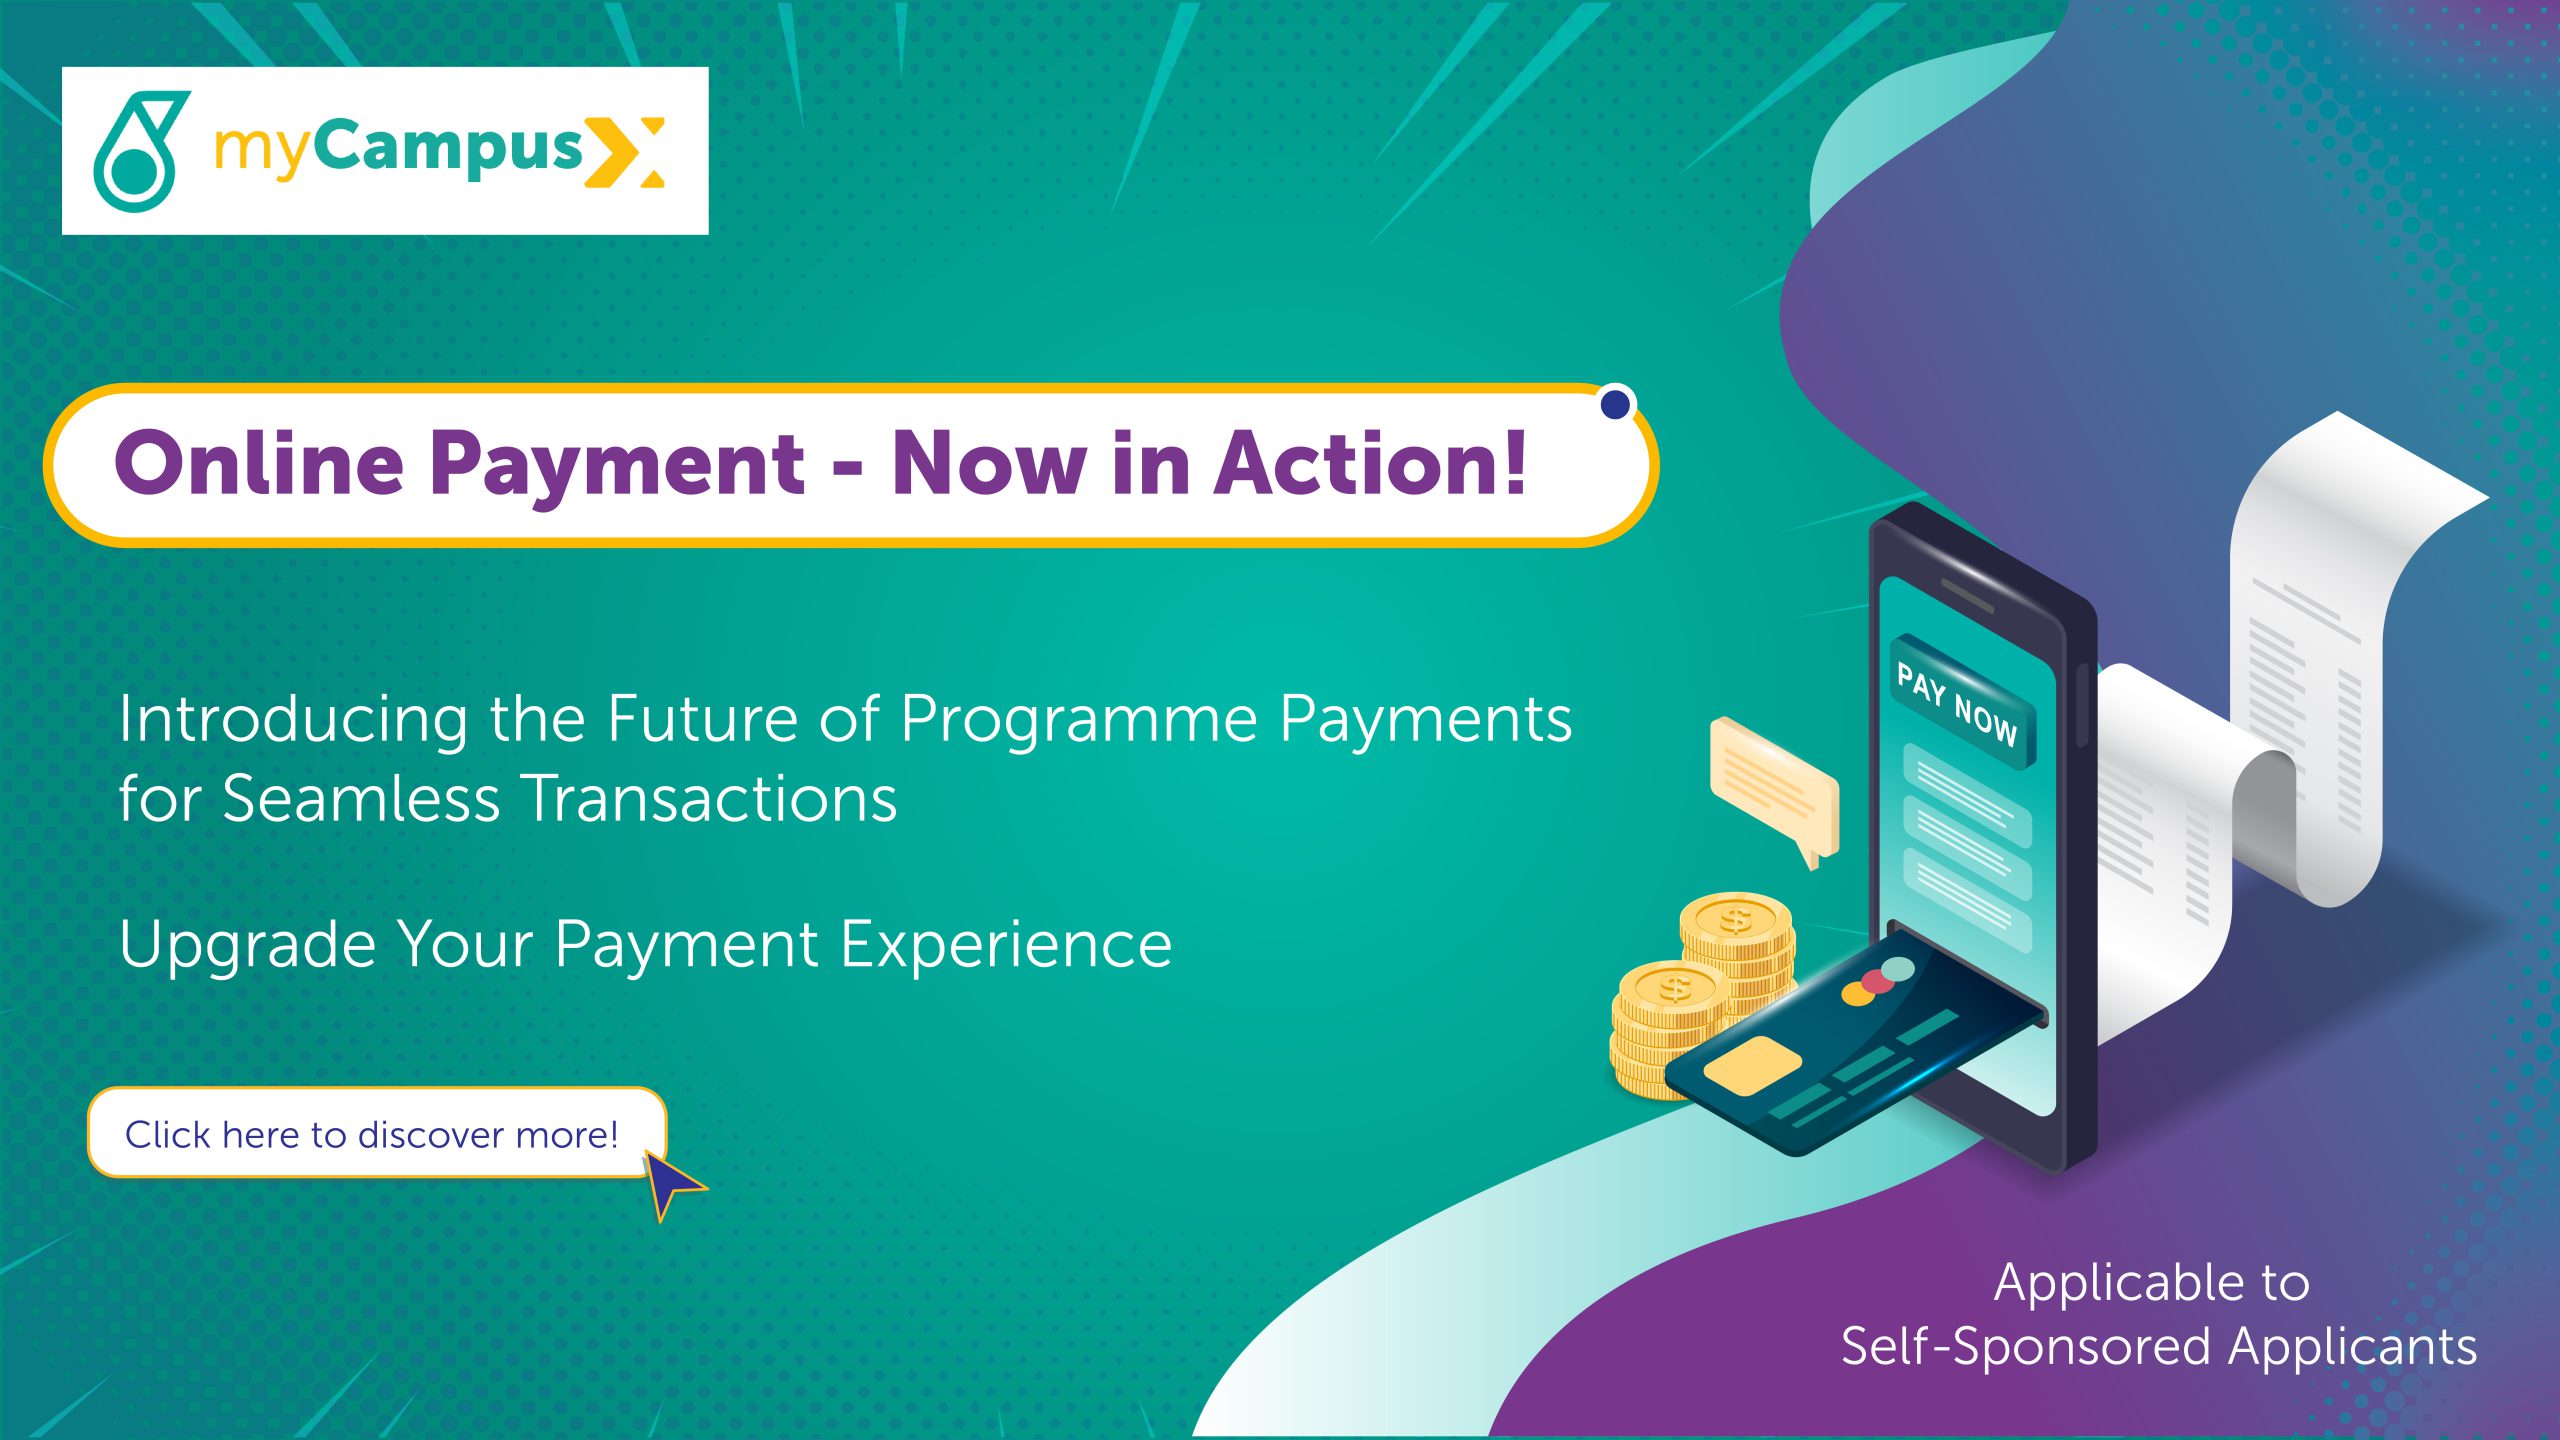 Online Payment for Self-Sponsored Applicants Launches